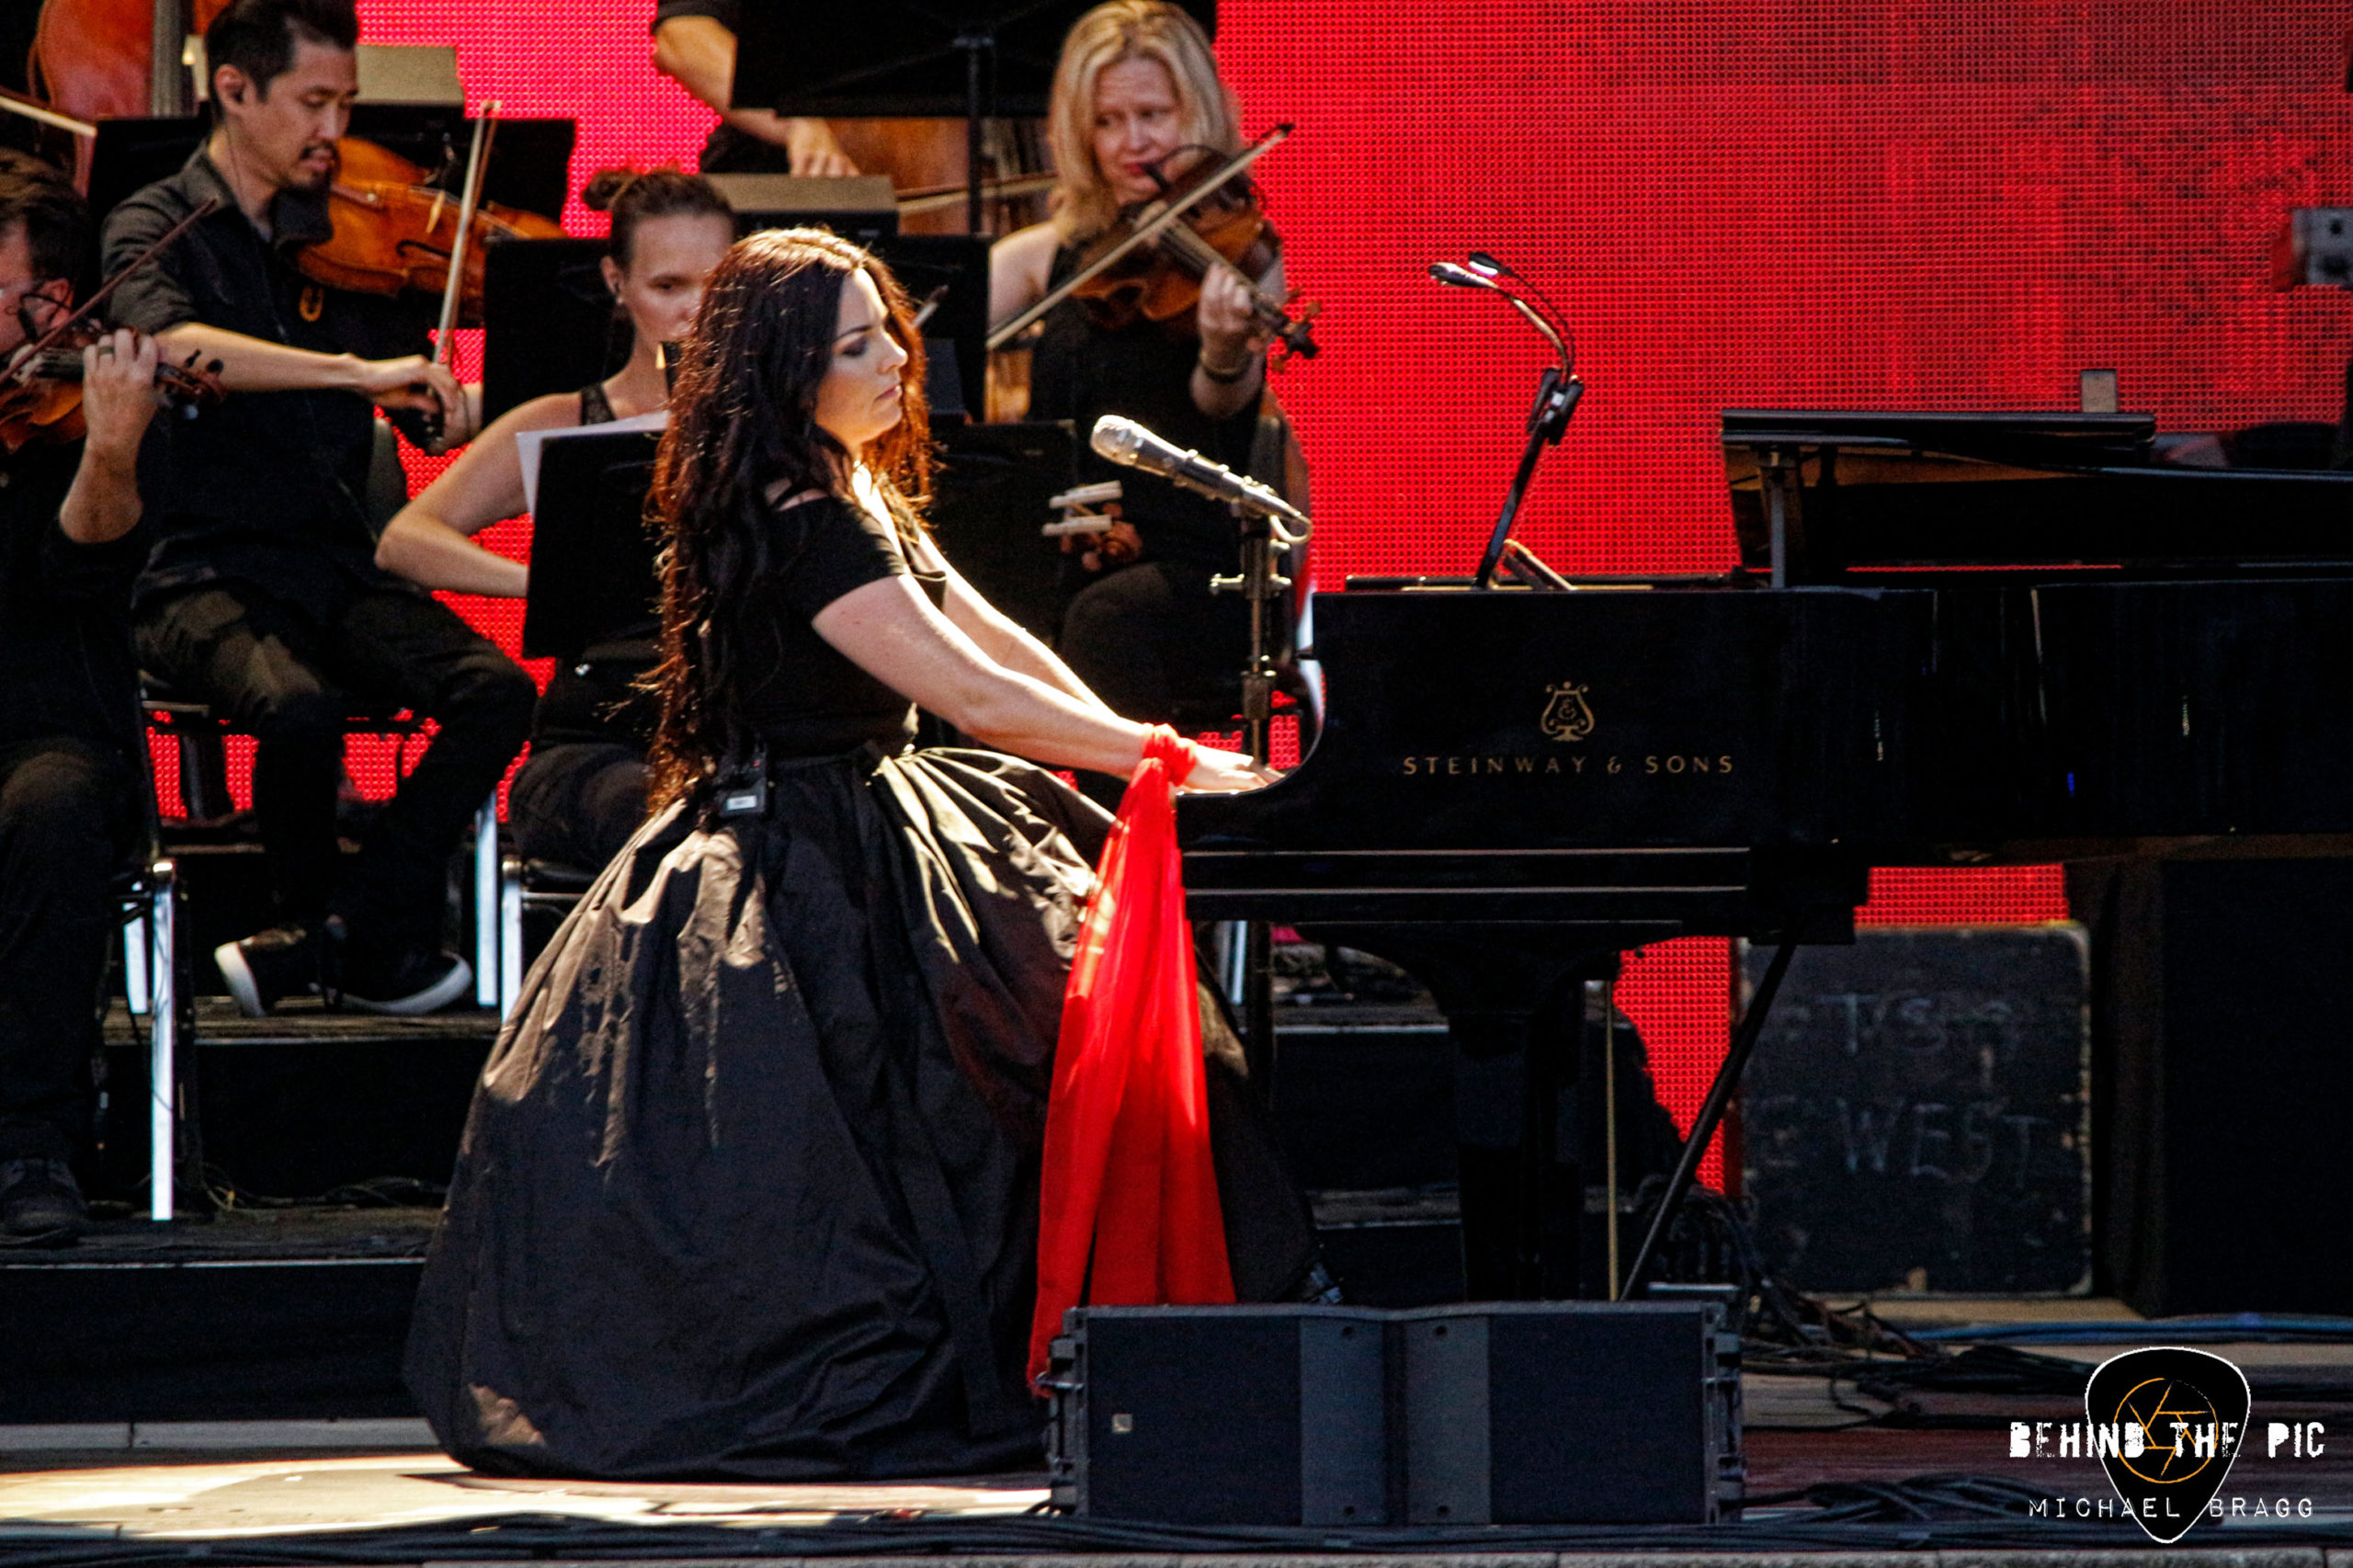 Amy Lee of Evanescence at CCNB Amphitheatre at Heritage Park in Simpsonville South Carolina